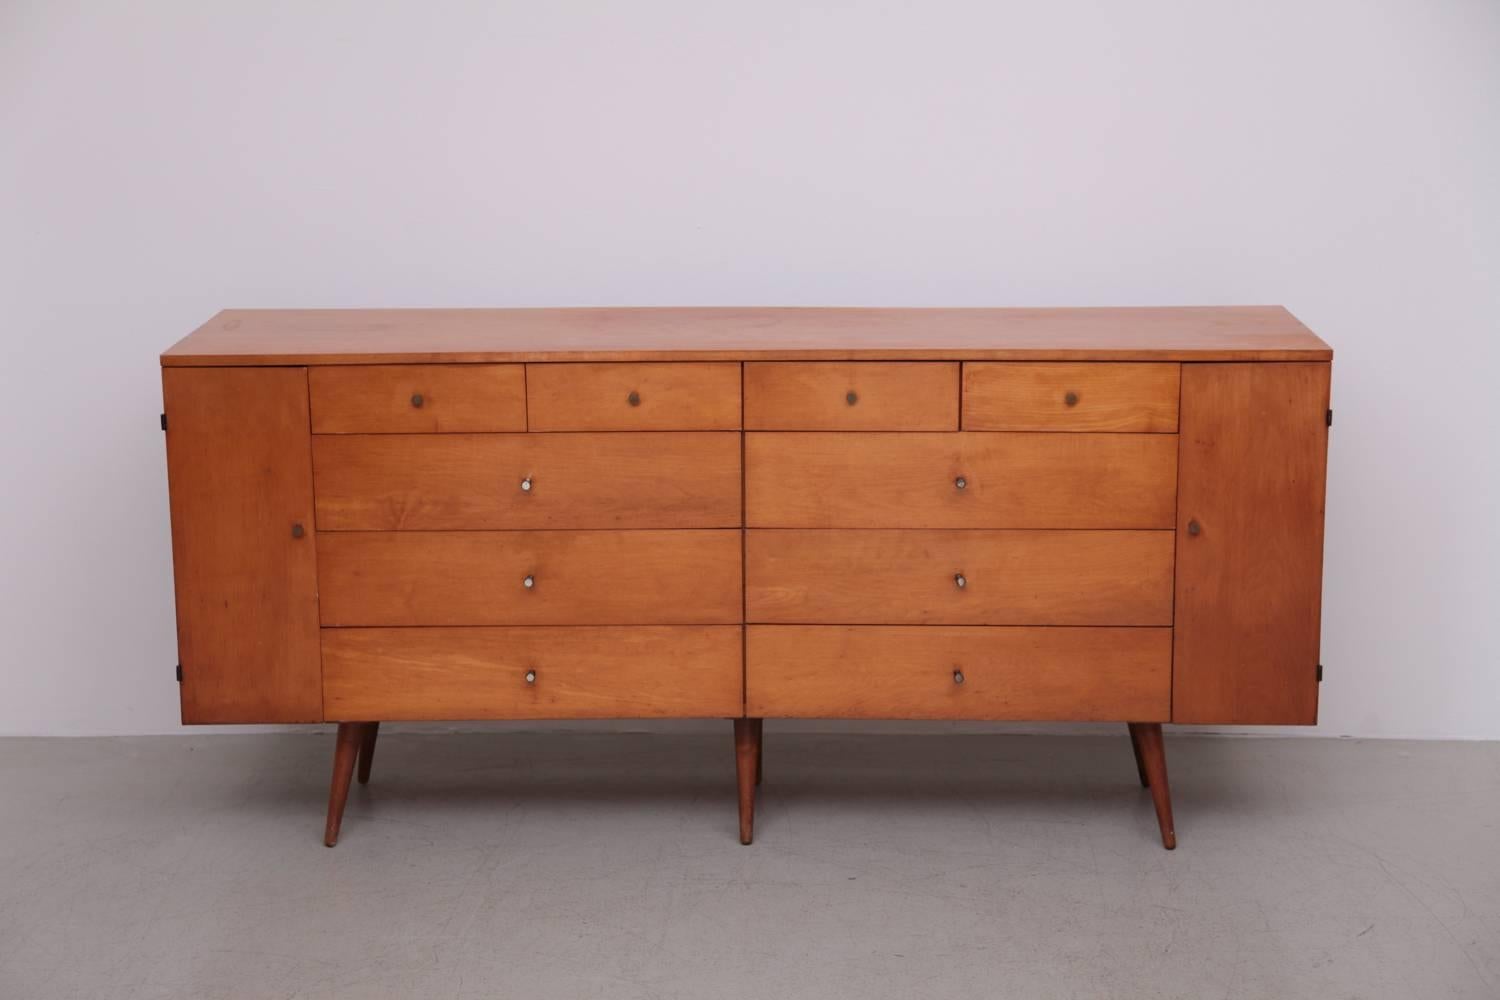 Solid maple McCobb 20-drawer dresser features the Classic cone pulls and maple finish that made this Mid-Century furniture line so popular. Original beautiful patina.